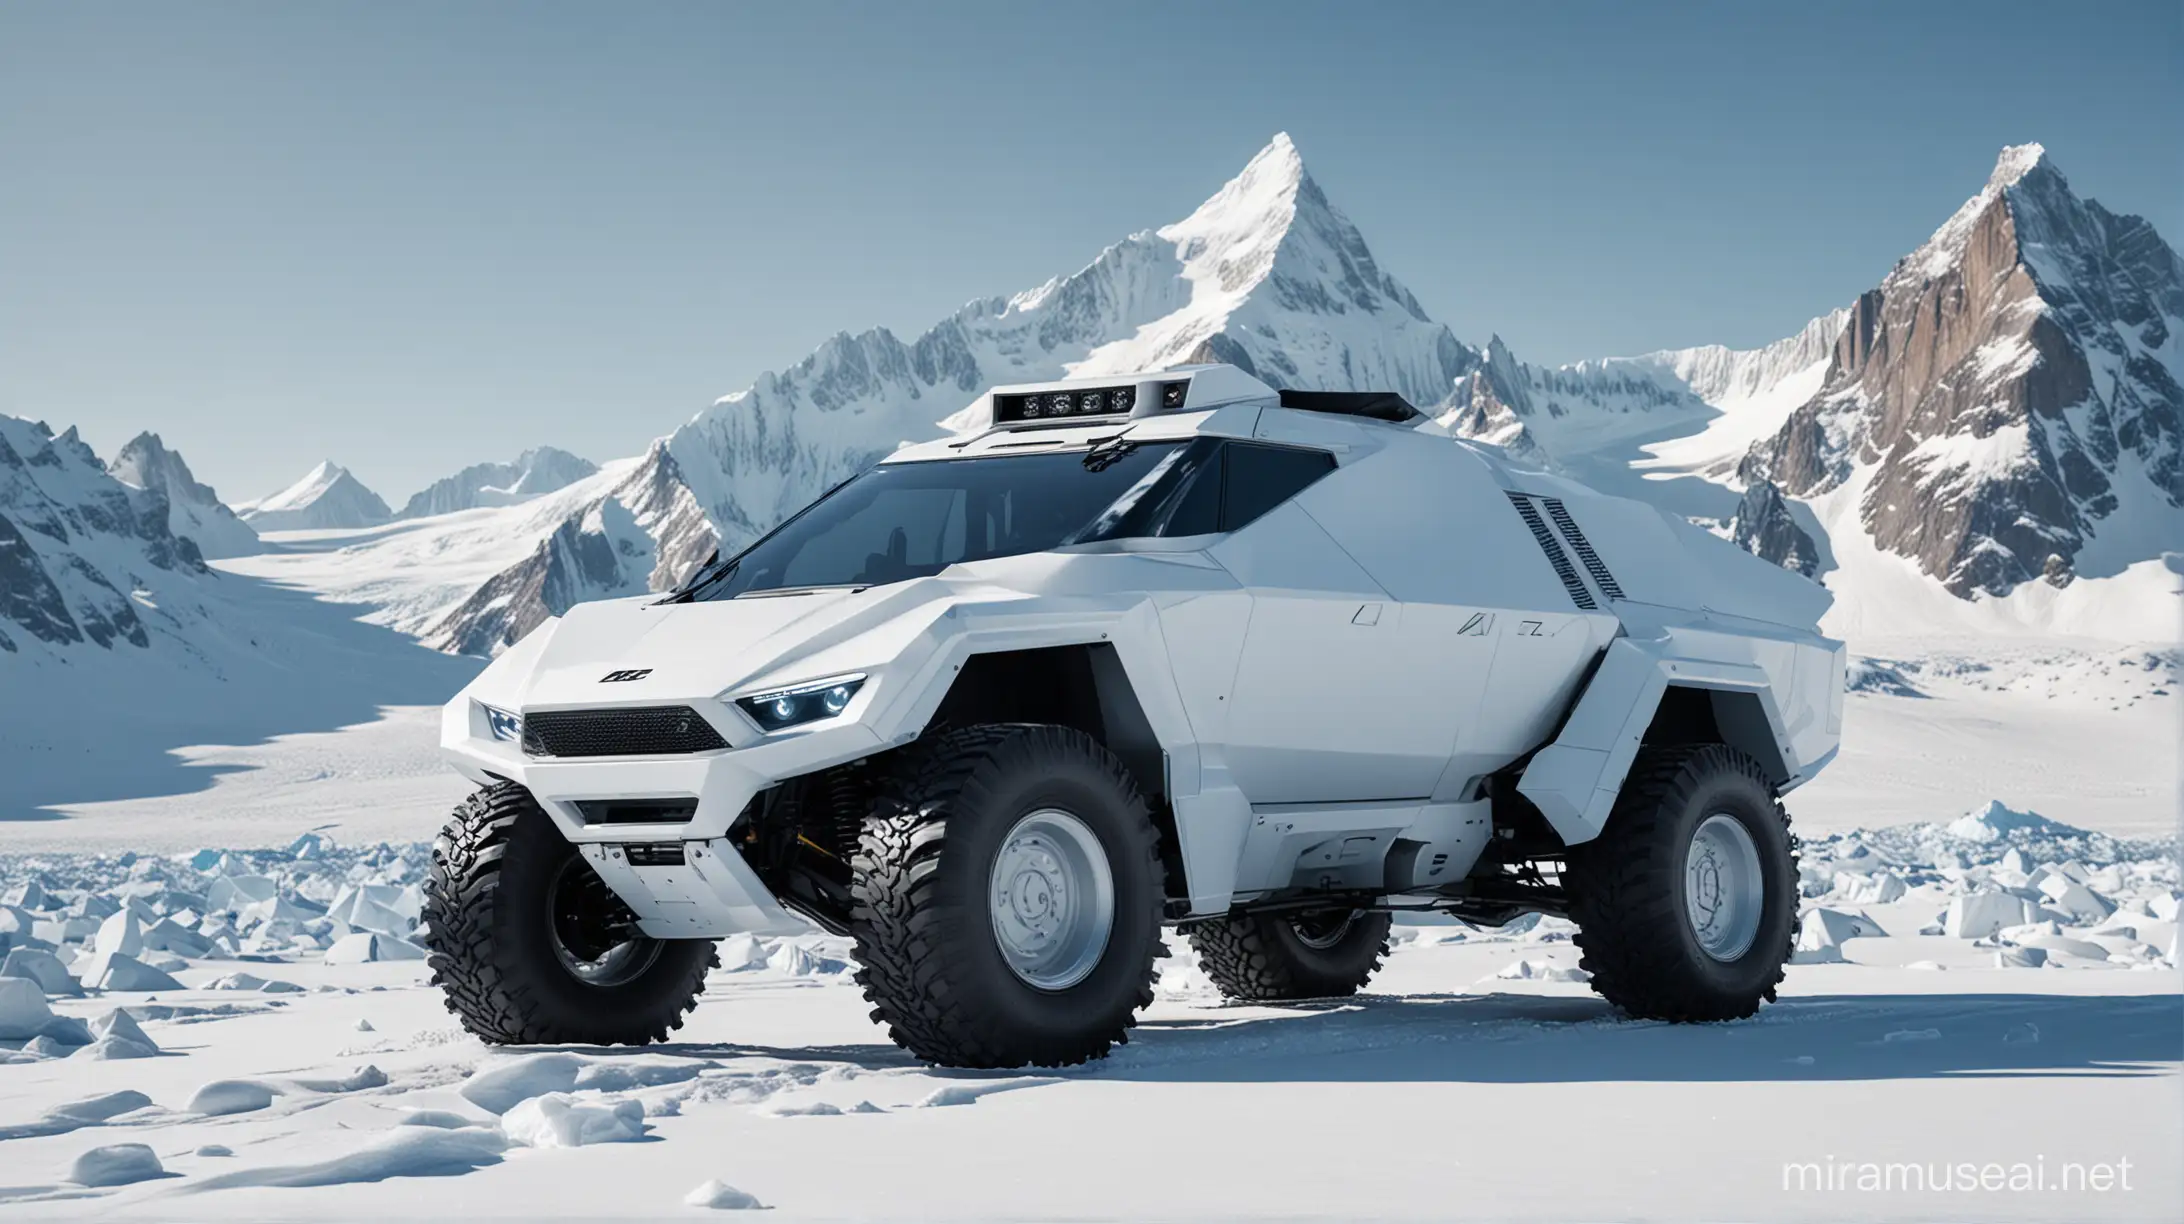 Futuristic New: A very unusual-looking Cybertruck of the future, coated in pristine white, parked atop a snow-covered mountain peak with panoramic views of icy glaciers and jagged peaks. The shot captures the vehicle's front, highlighting its rugged yet elegant exterior against the backdrop of the frozen wilderness. Realistic, shot on a Sony DSLR, 250mm lens f/2.8, ultra-detailed.